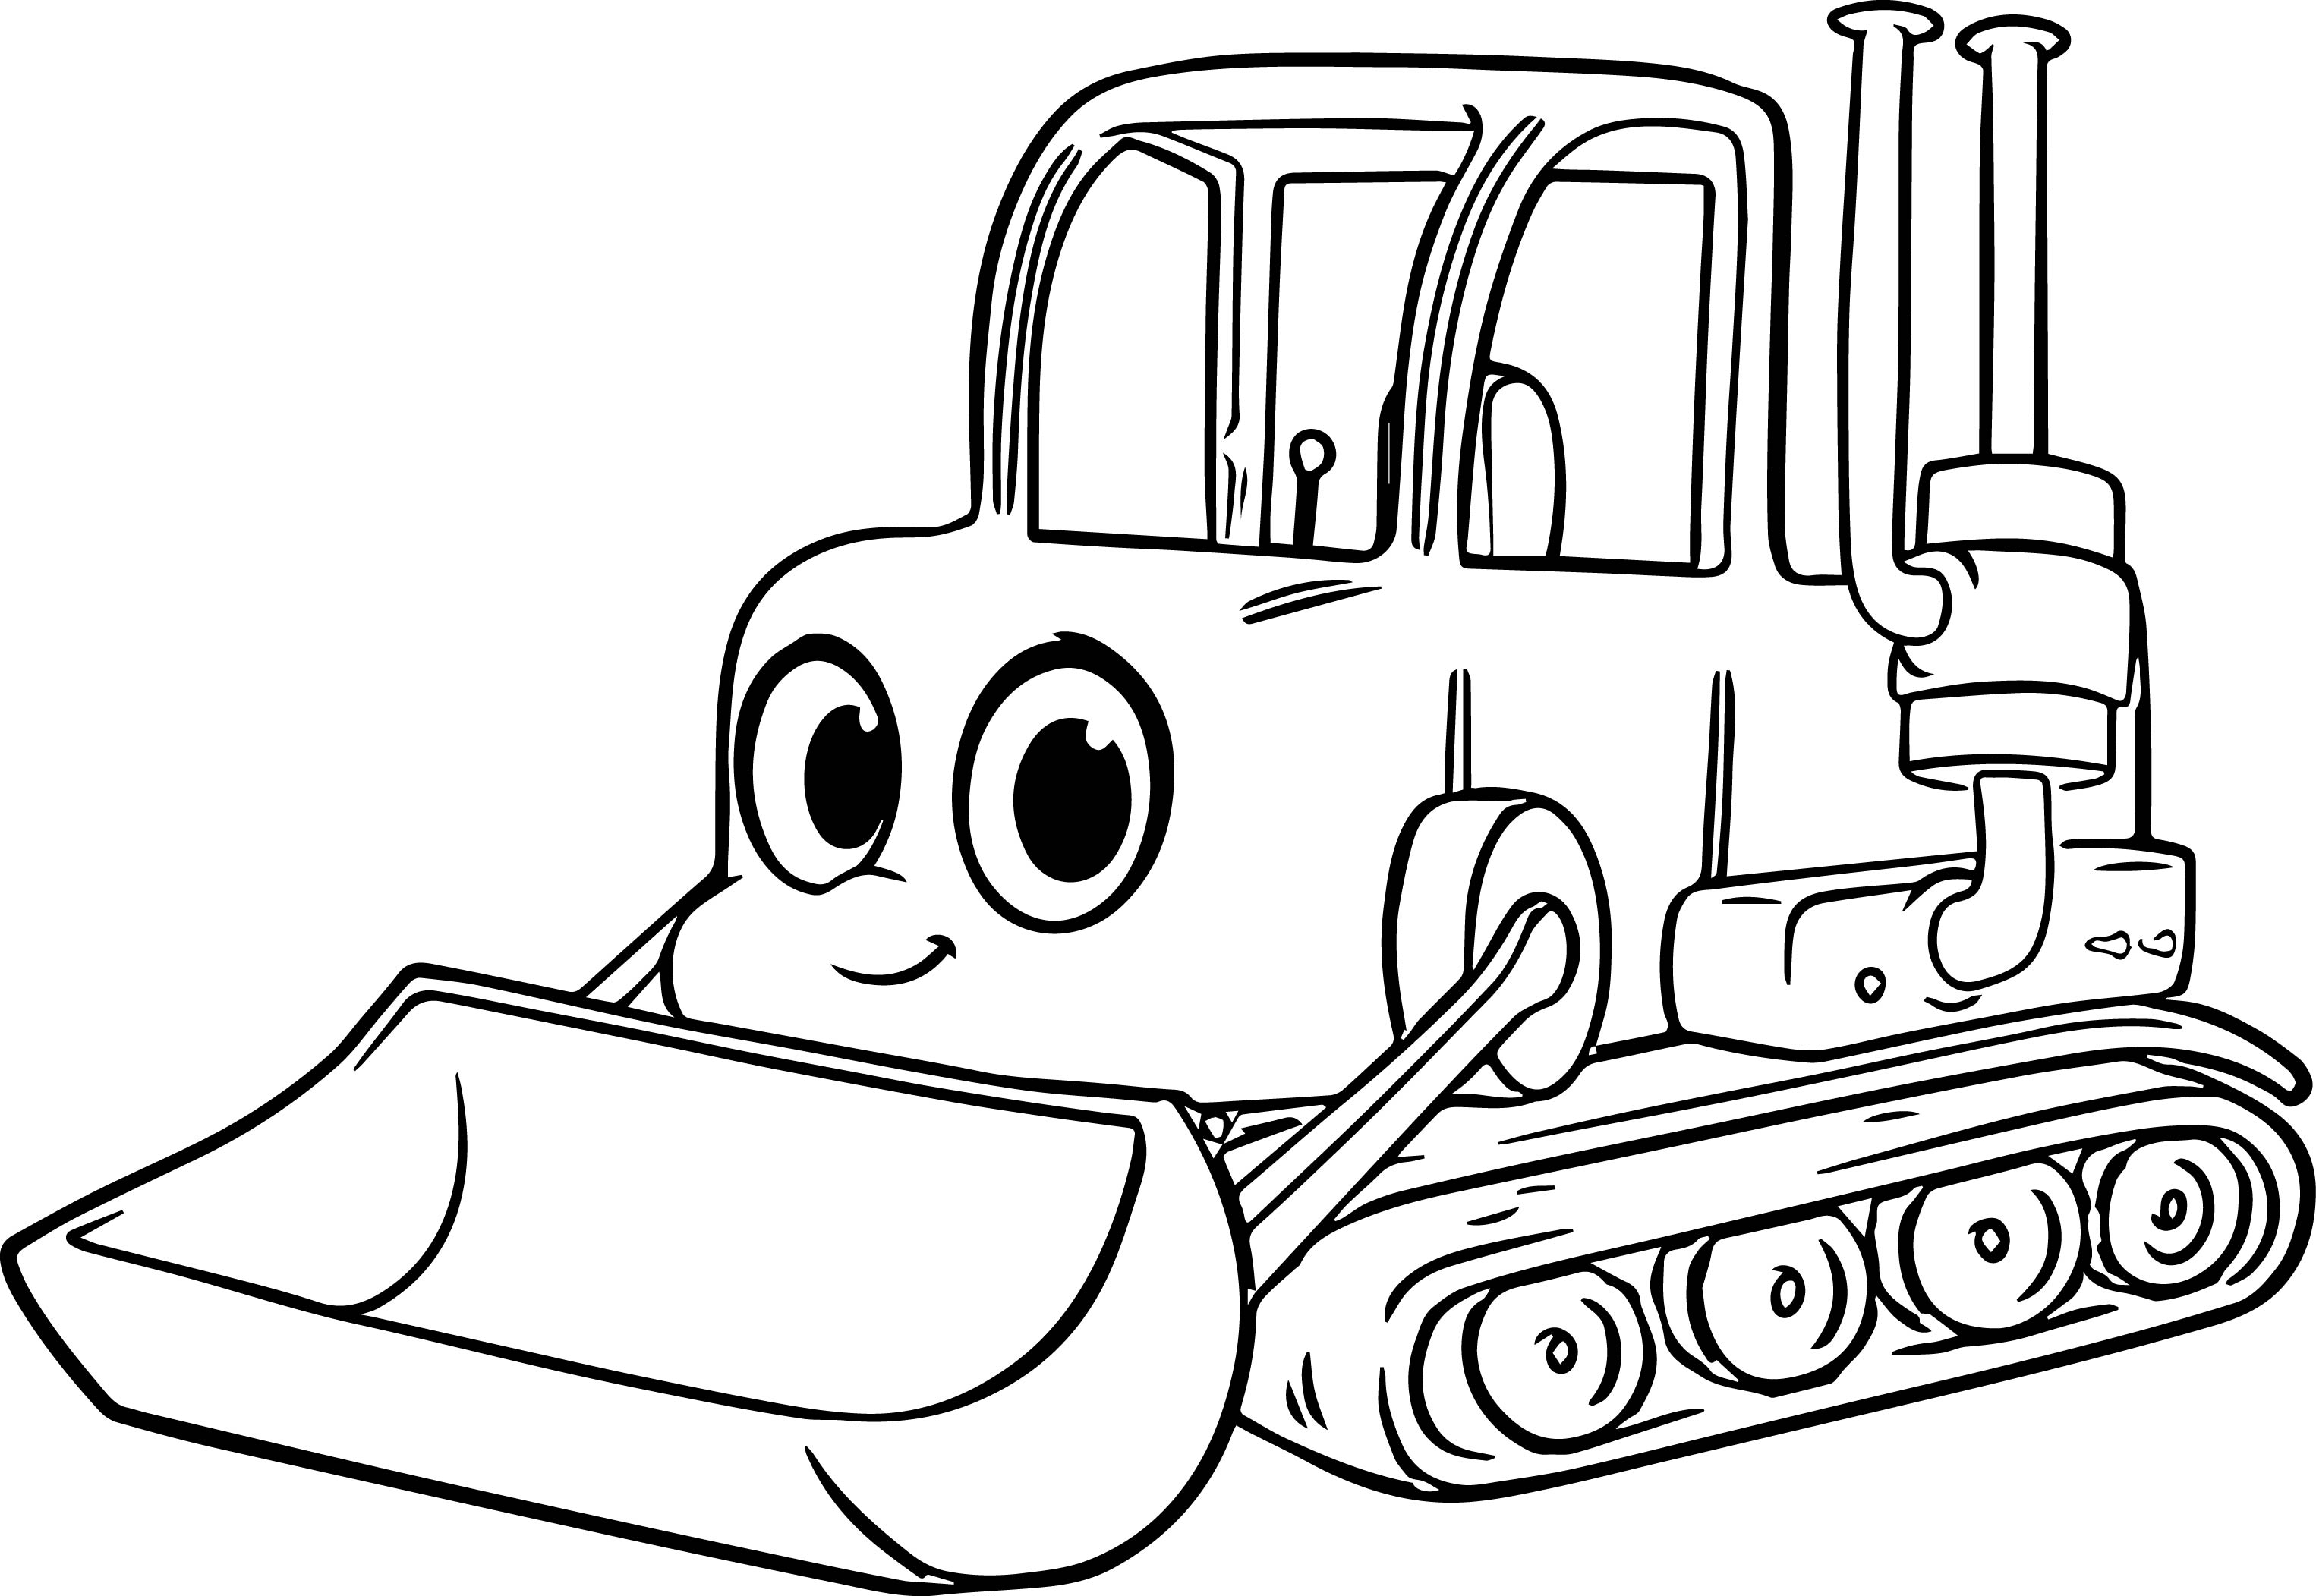 Heavy Equipment Coloring Pages at GetColorings.com   Free ...